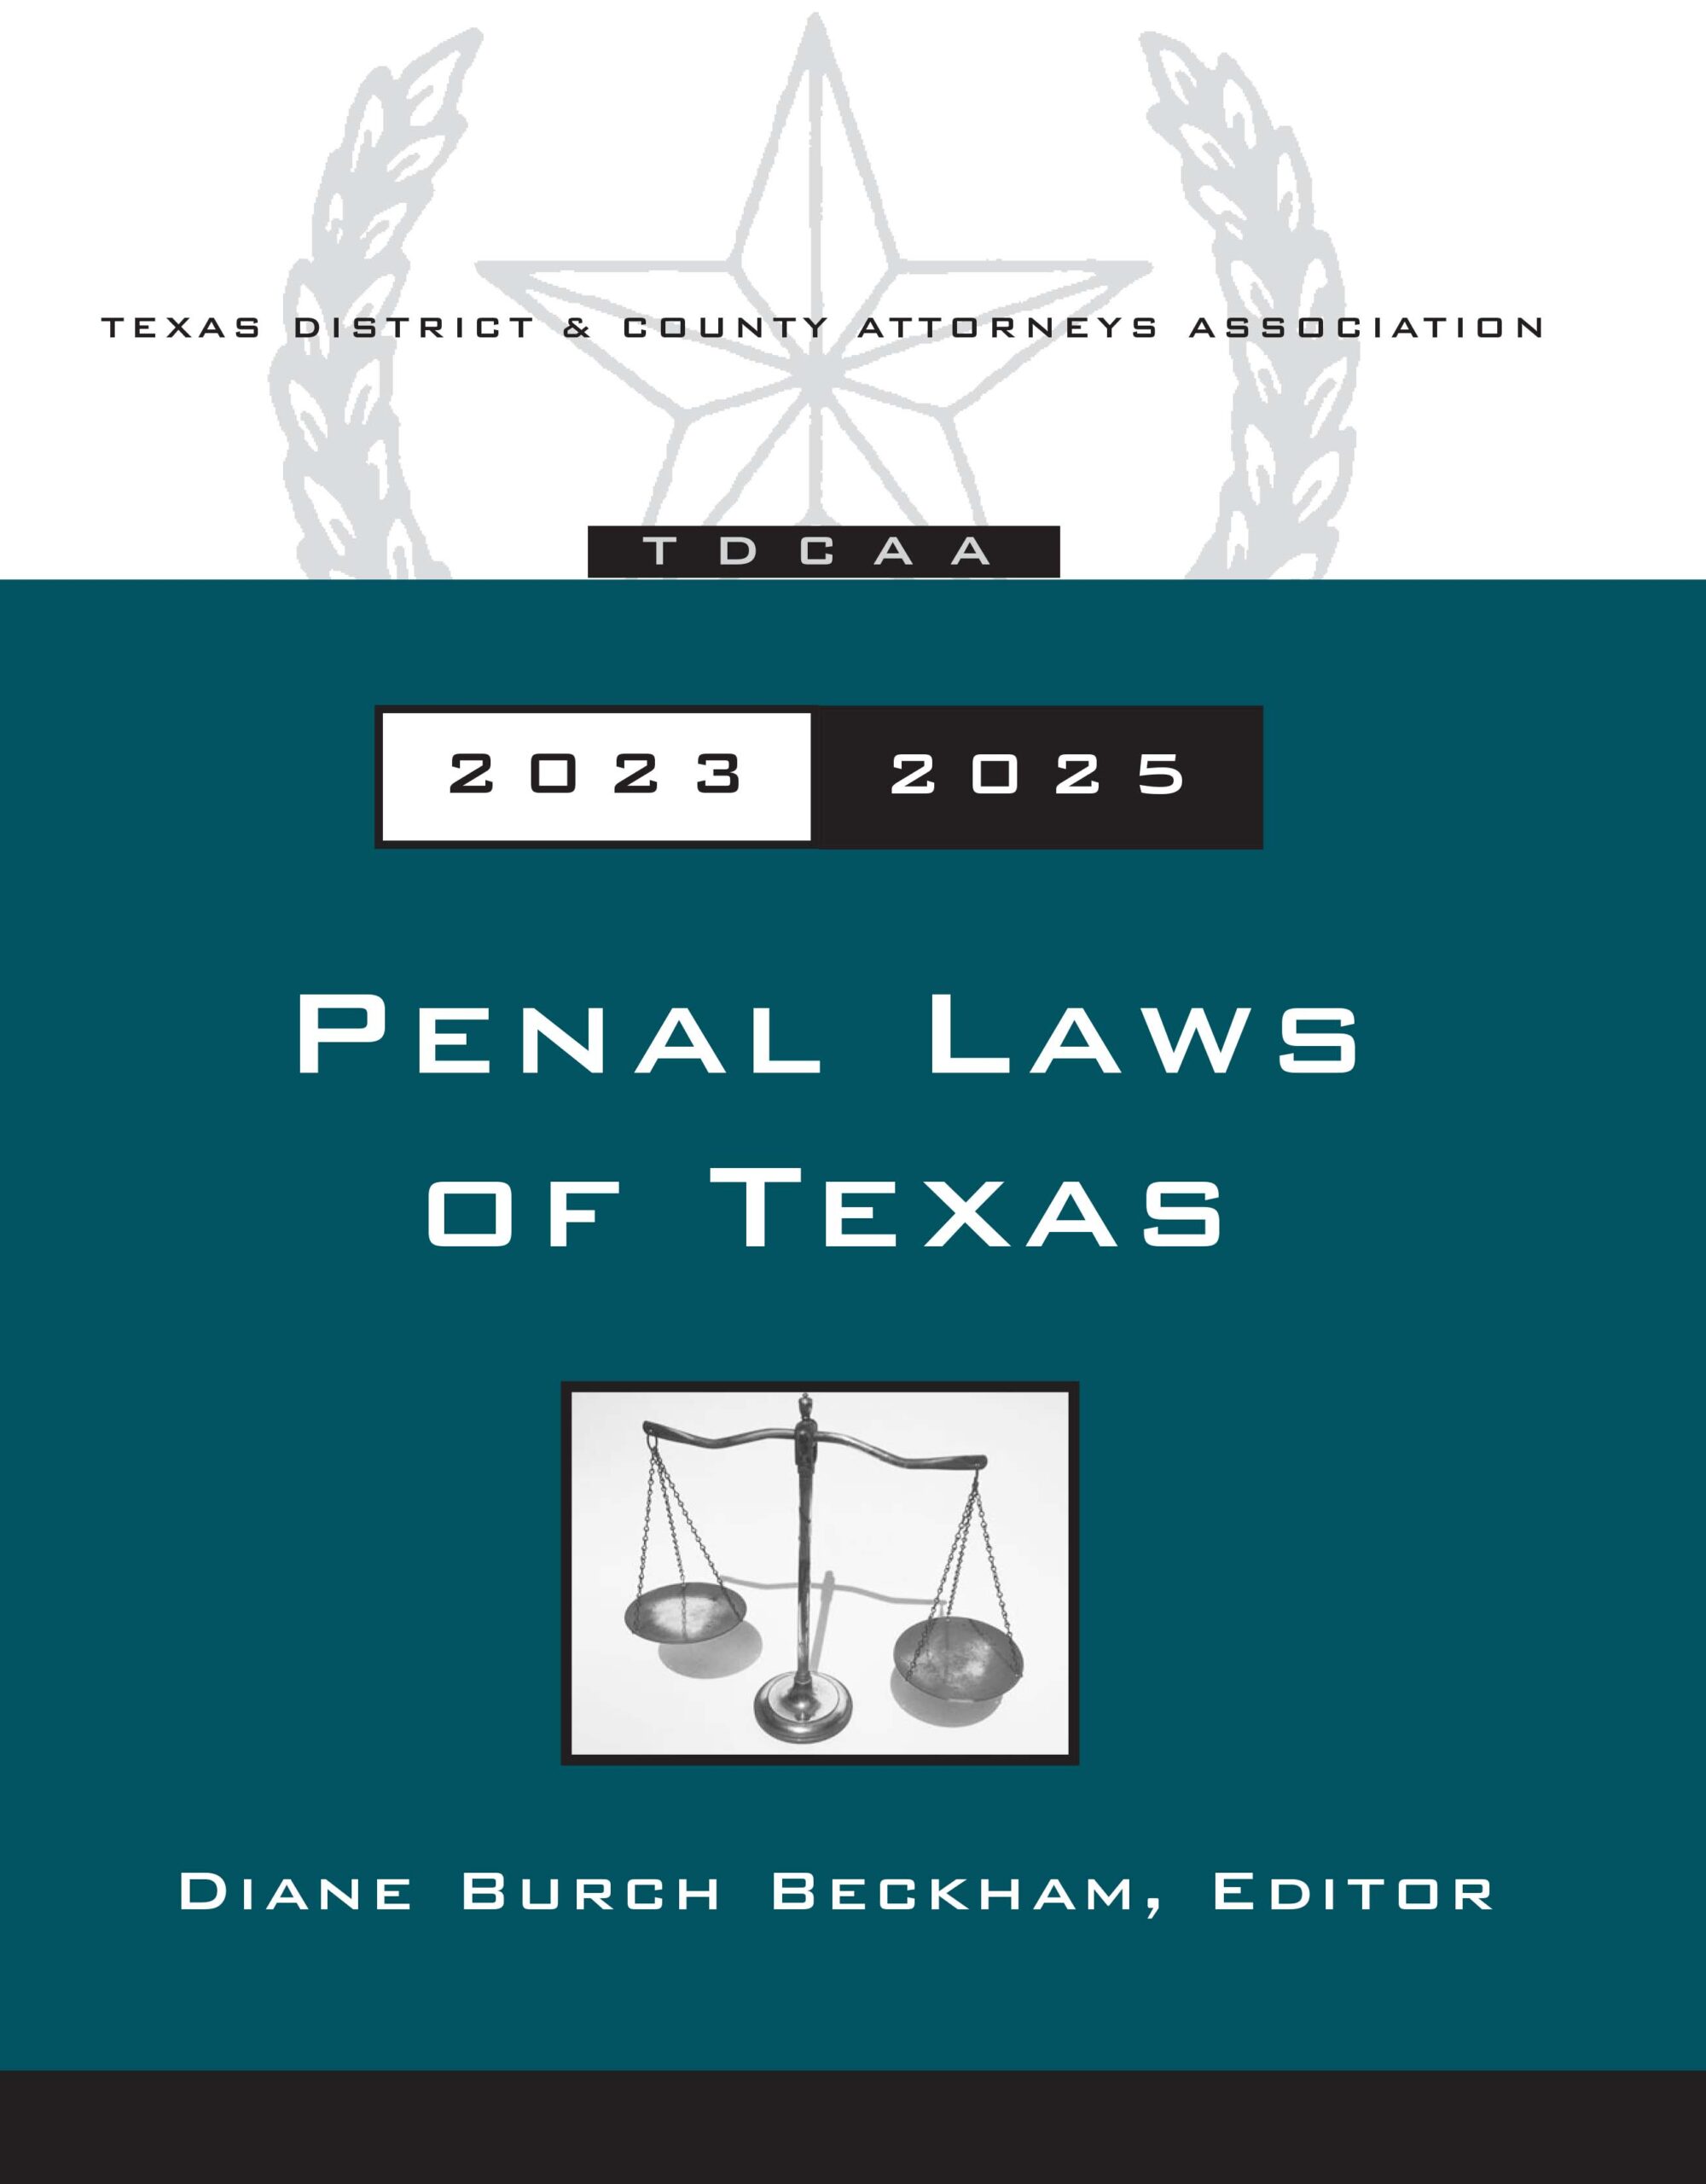 Penal Laws of Texas (202325) Texas District & County Attorneys